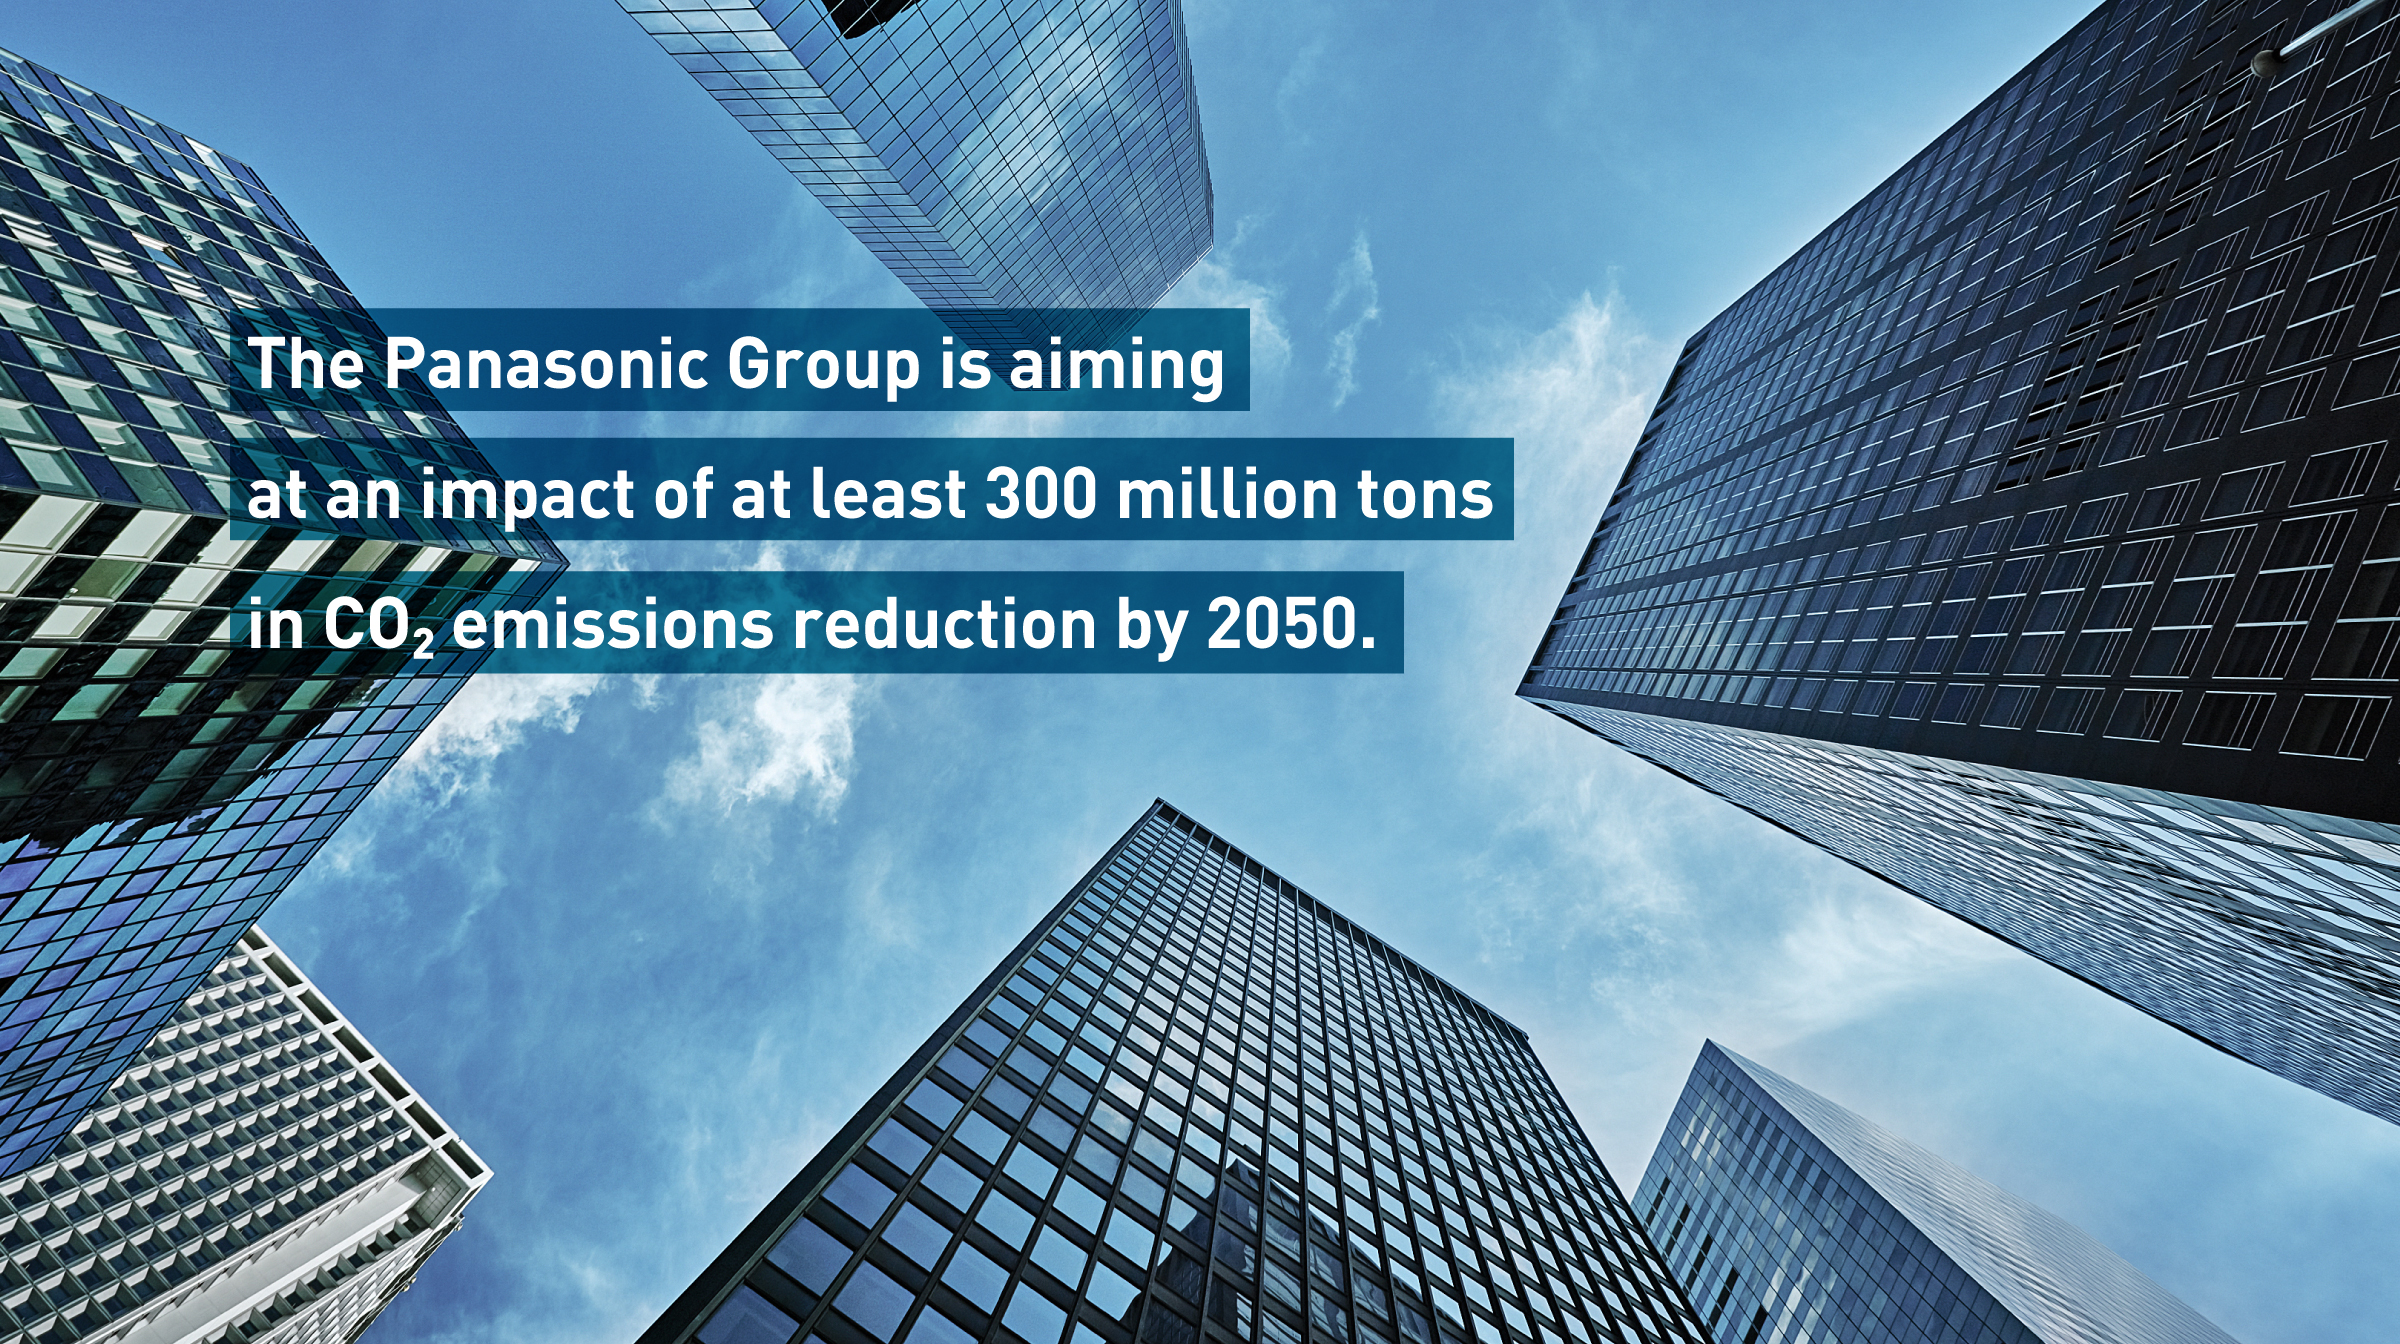 The Panasonic Group is aiming at an impact of at least 300 million tons in CO2 emissions reduction by 2050. Background photo: Tall skyscrapers viewed from below against a blue sky.